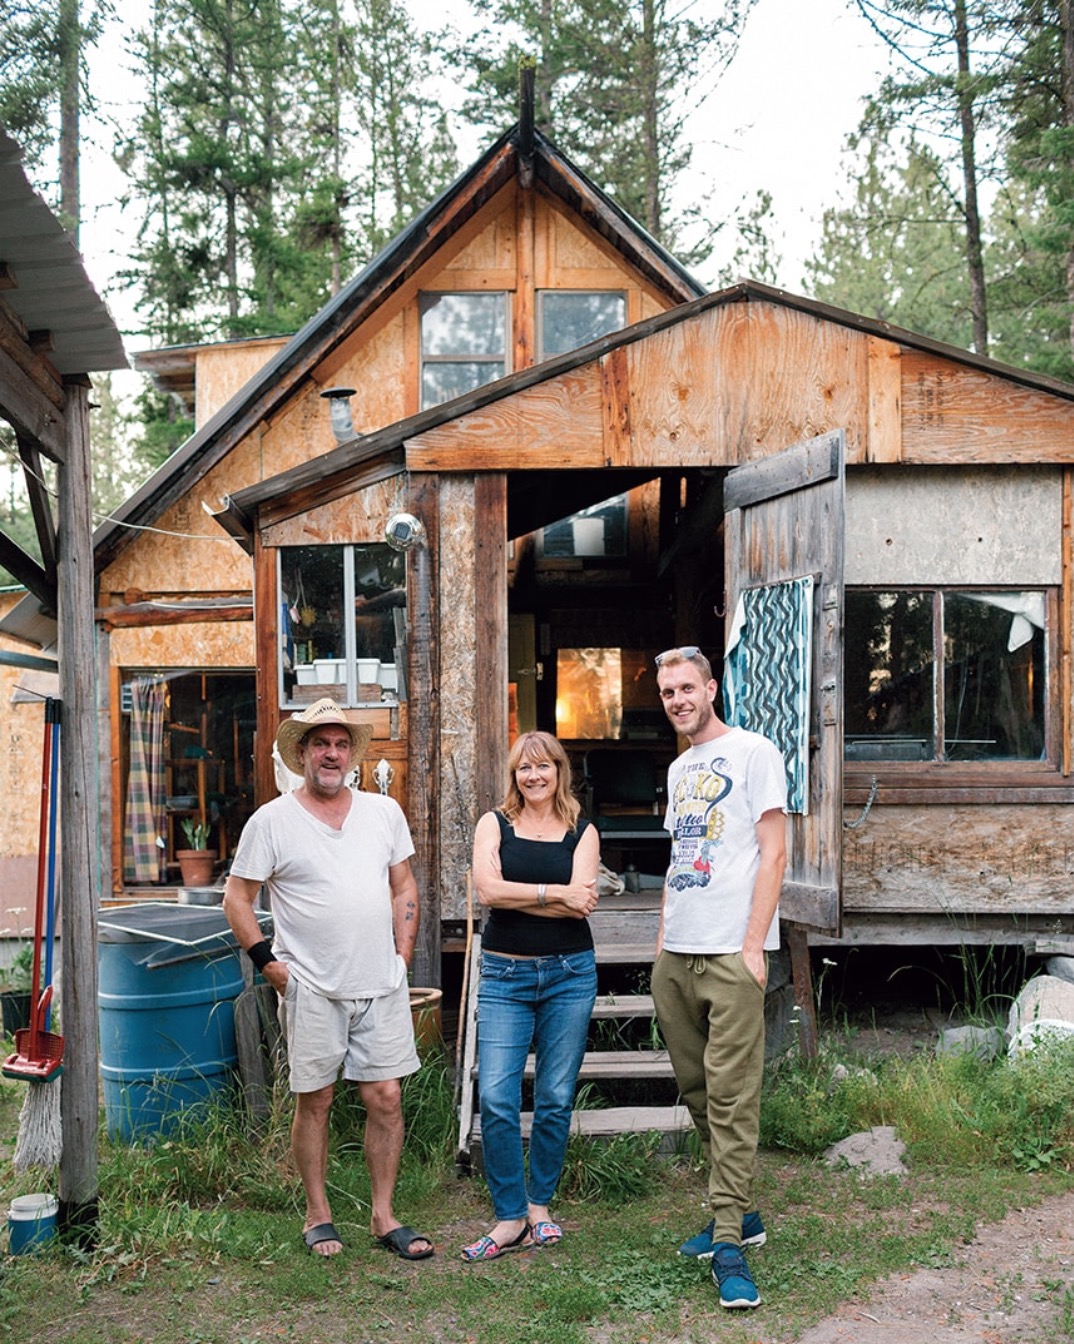 How 12 months in a log cabin changed my life